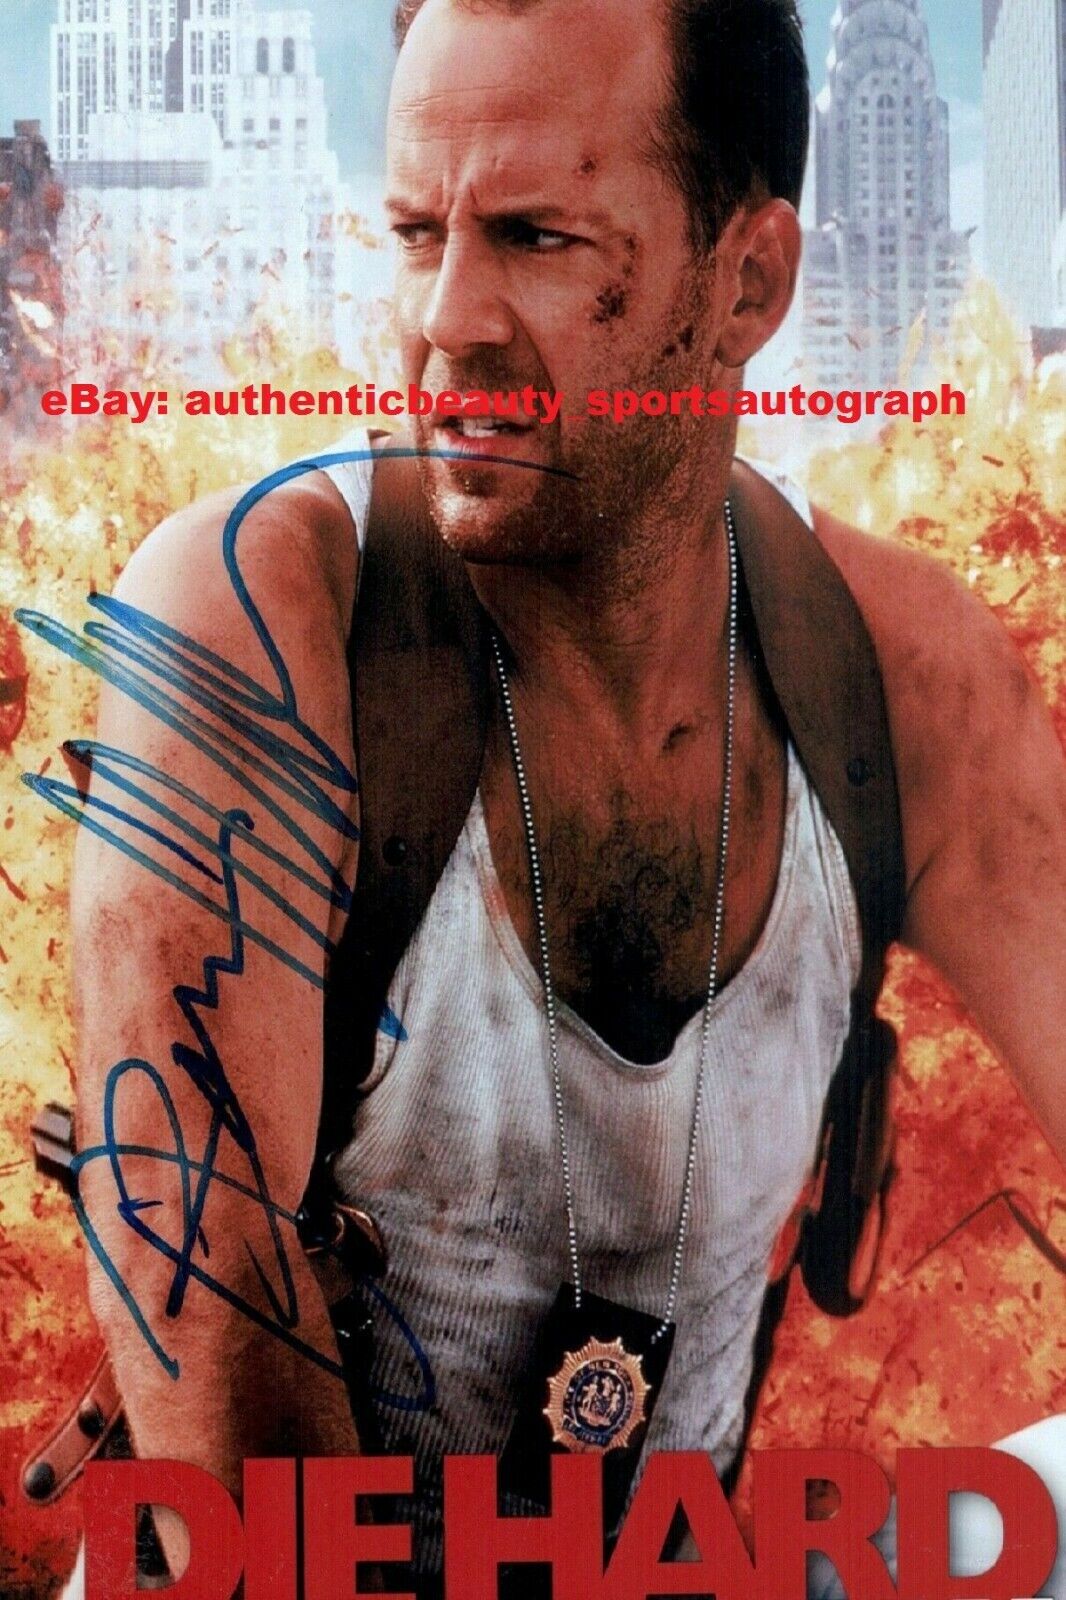 Bruce Willis Die Hard Hollywood Movie Auto Signed 12x18 Poster Photo Reprint Rp